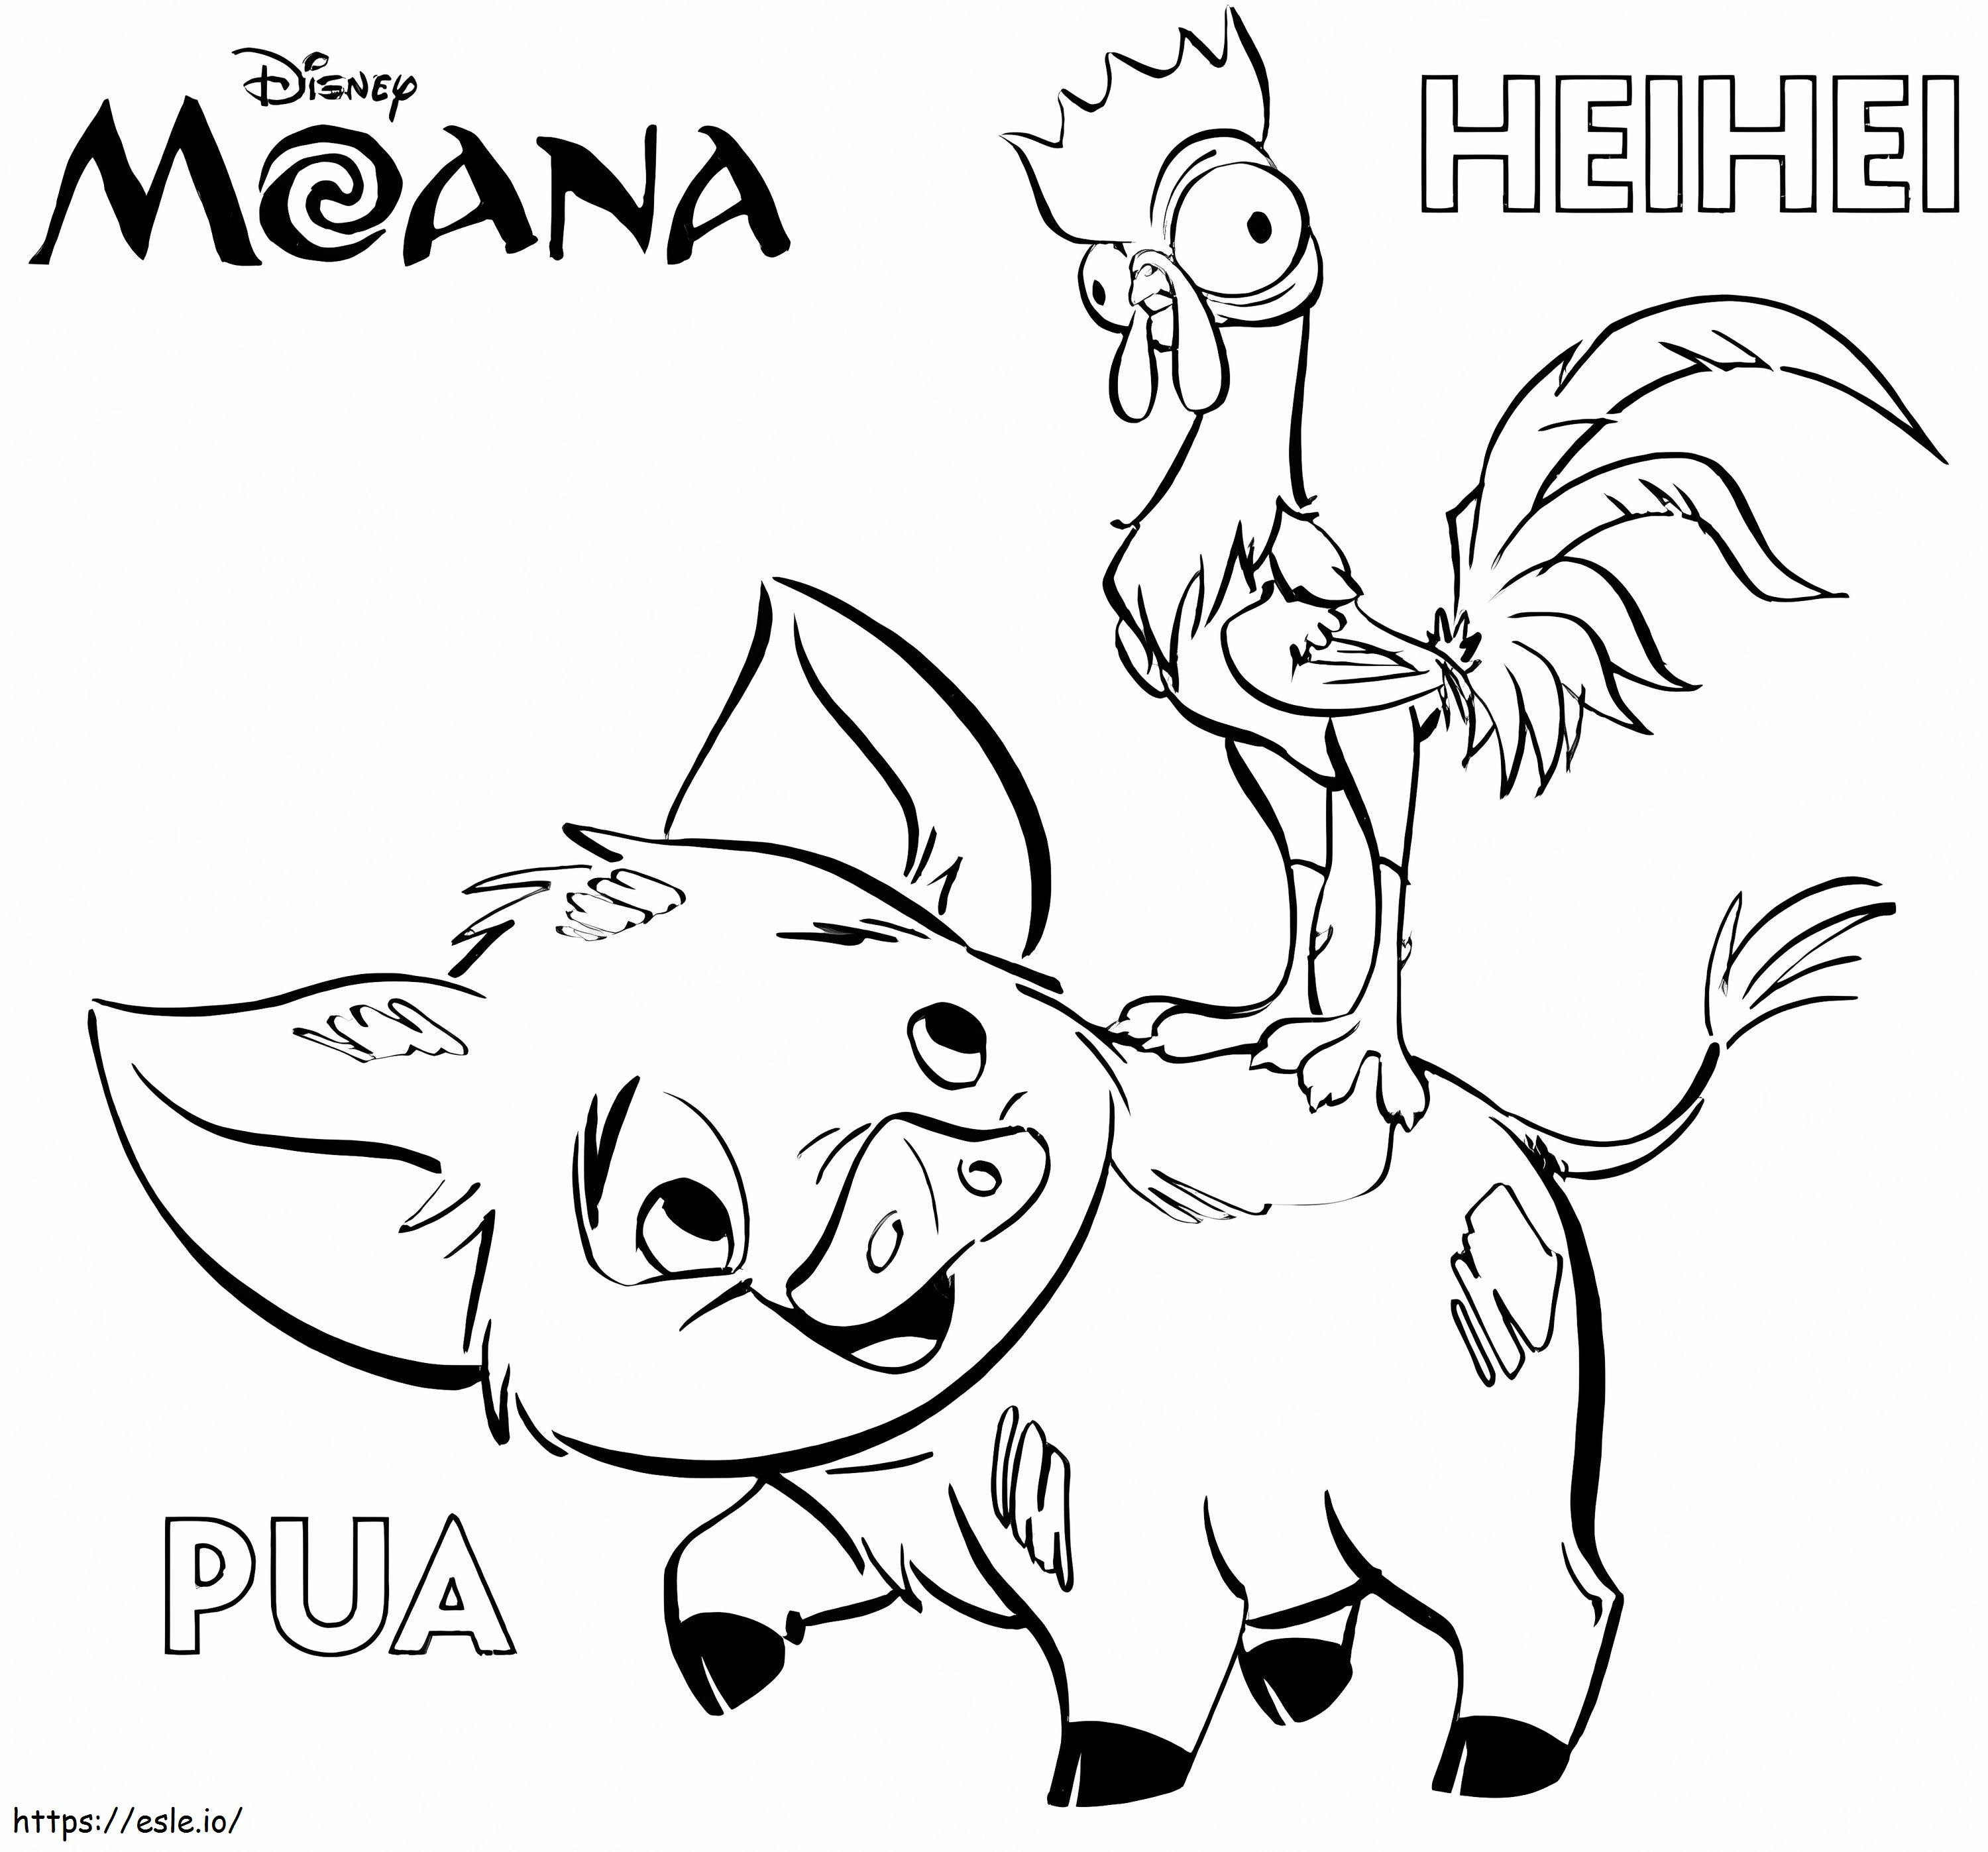 Pua And Heihei coloring page